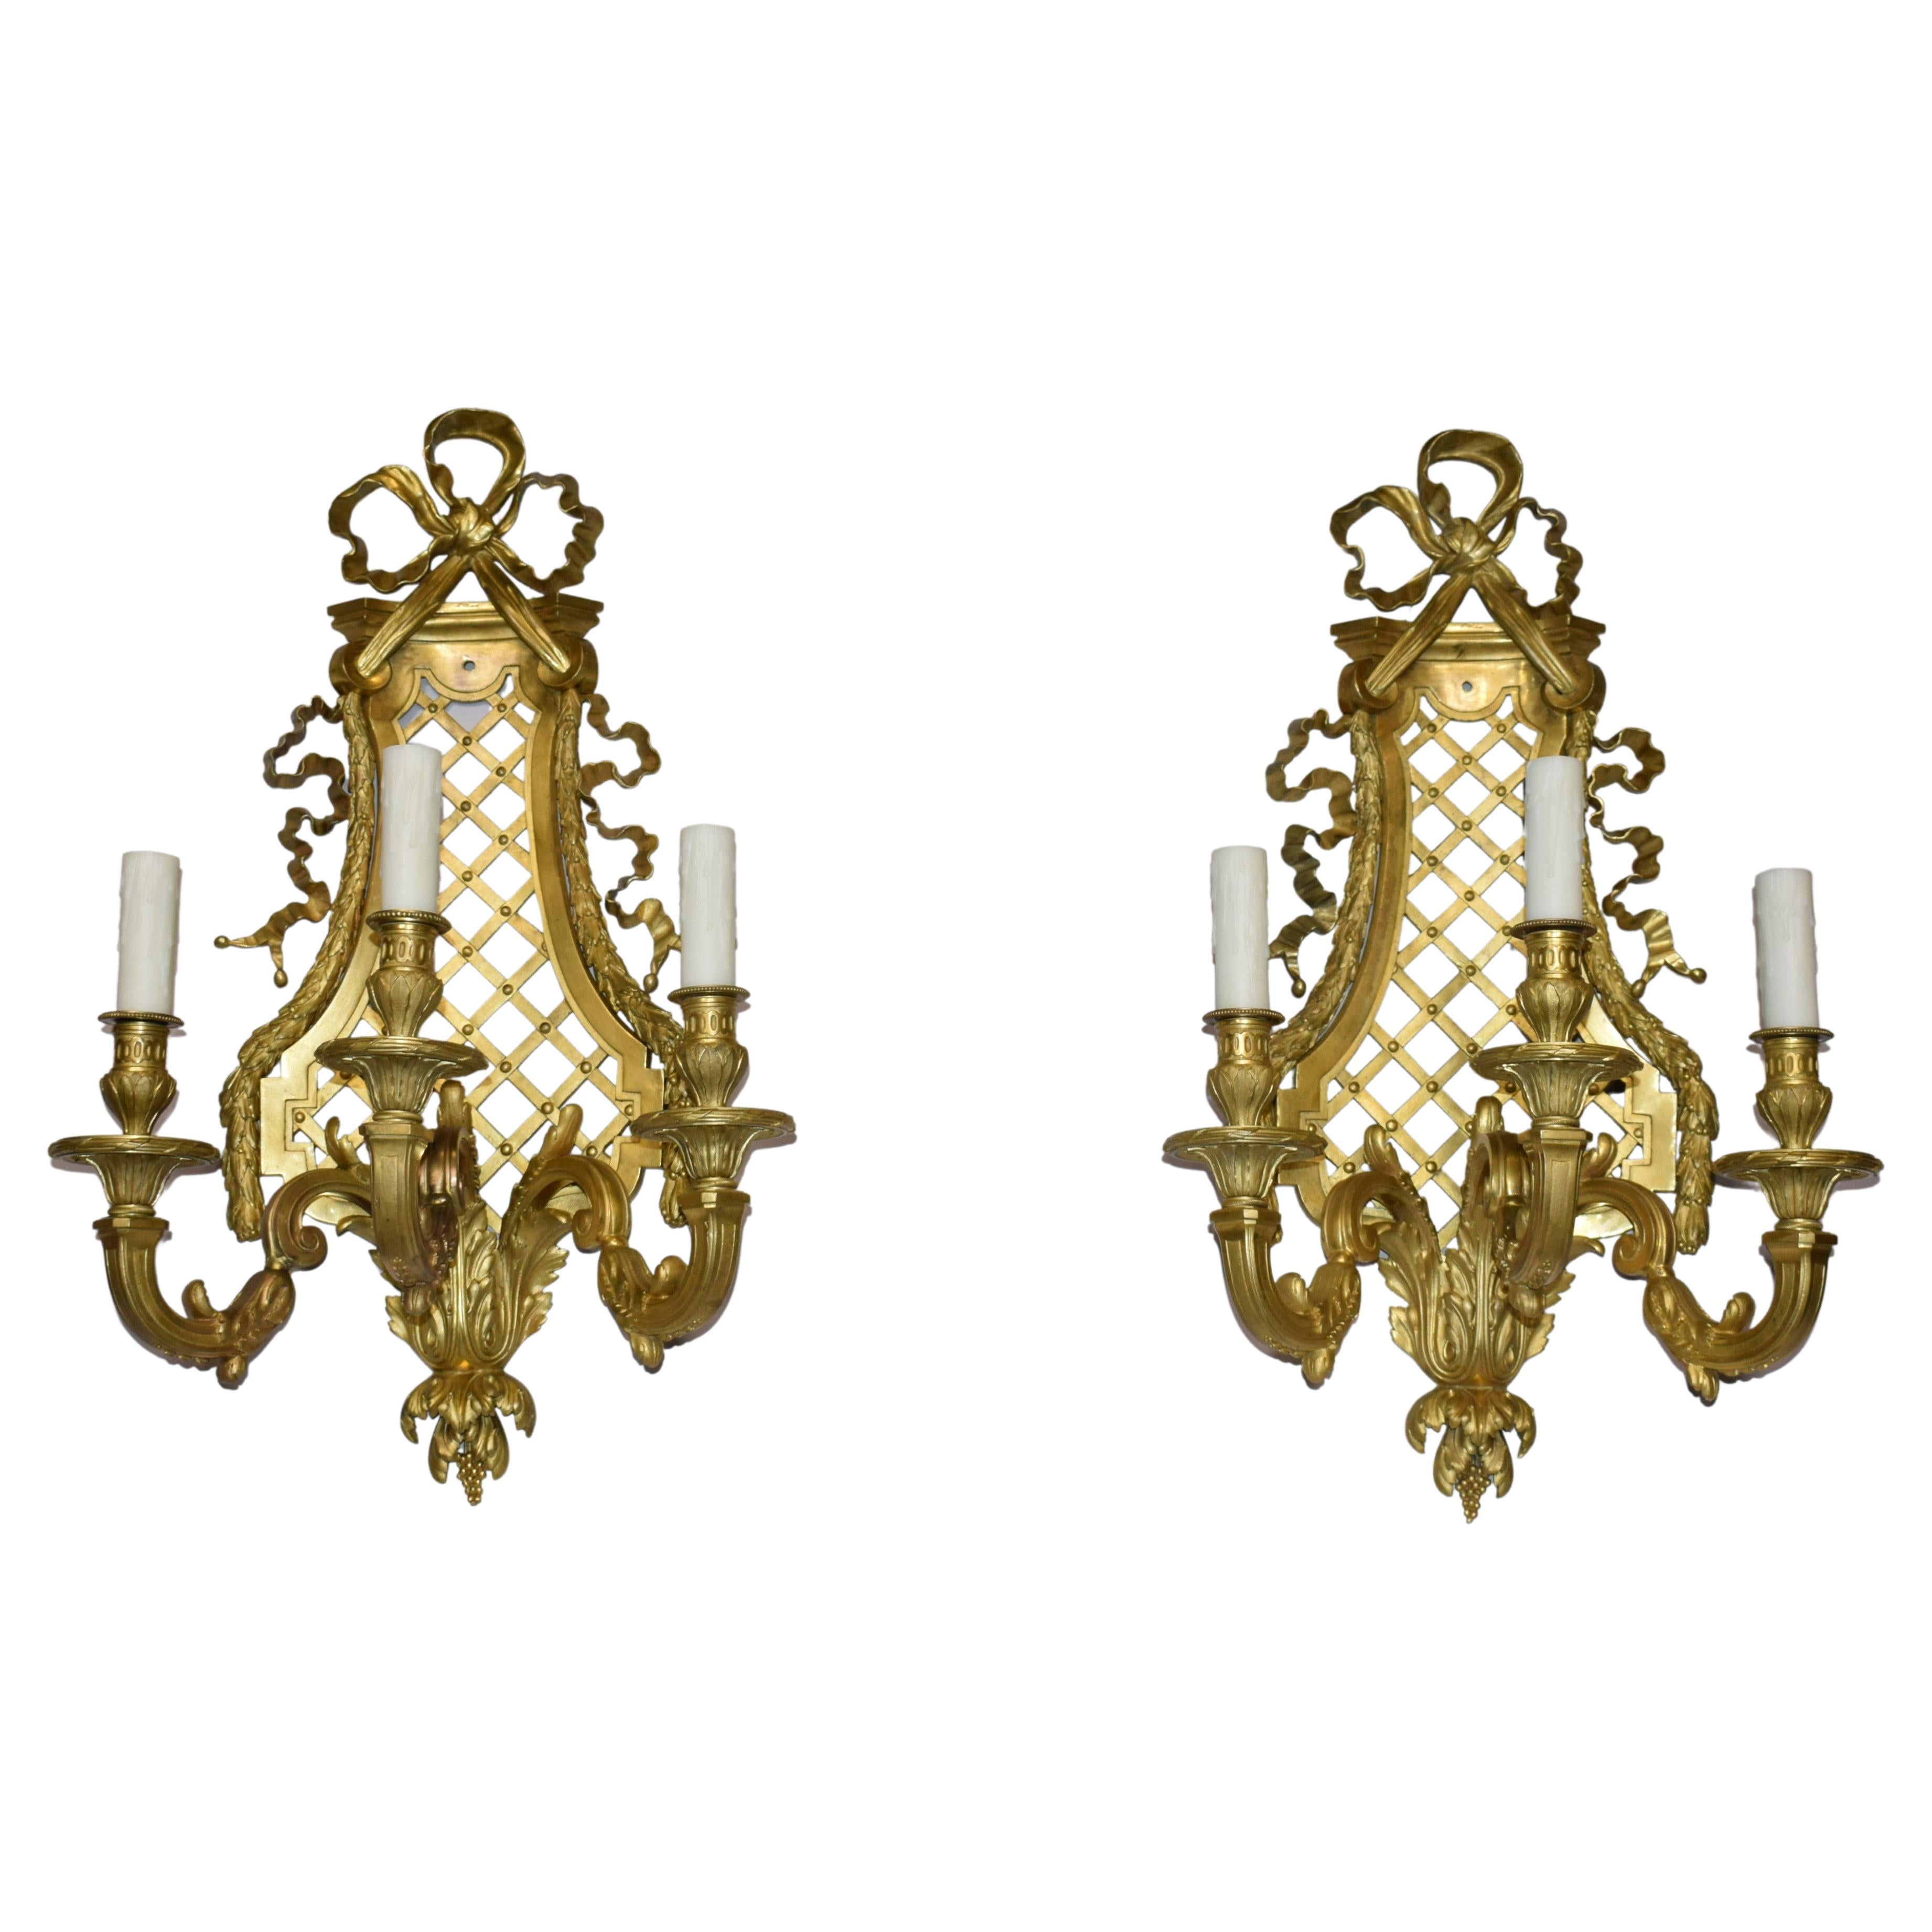 Pair of Gilt Bronze Wall Sconces by Henri Vian For Sale